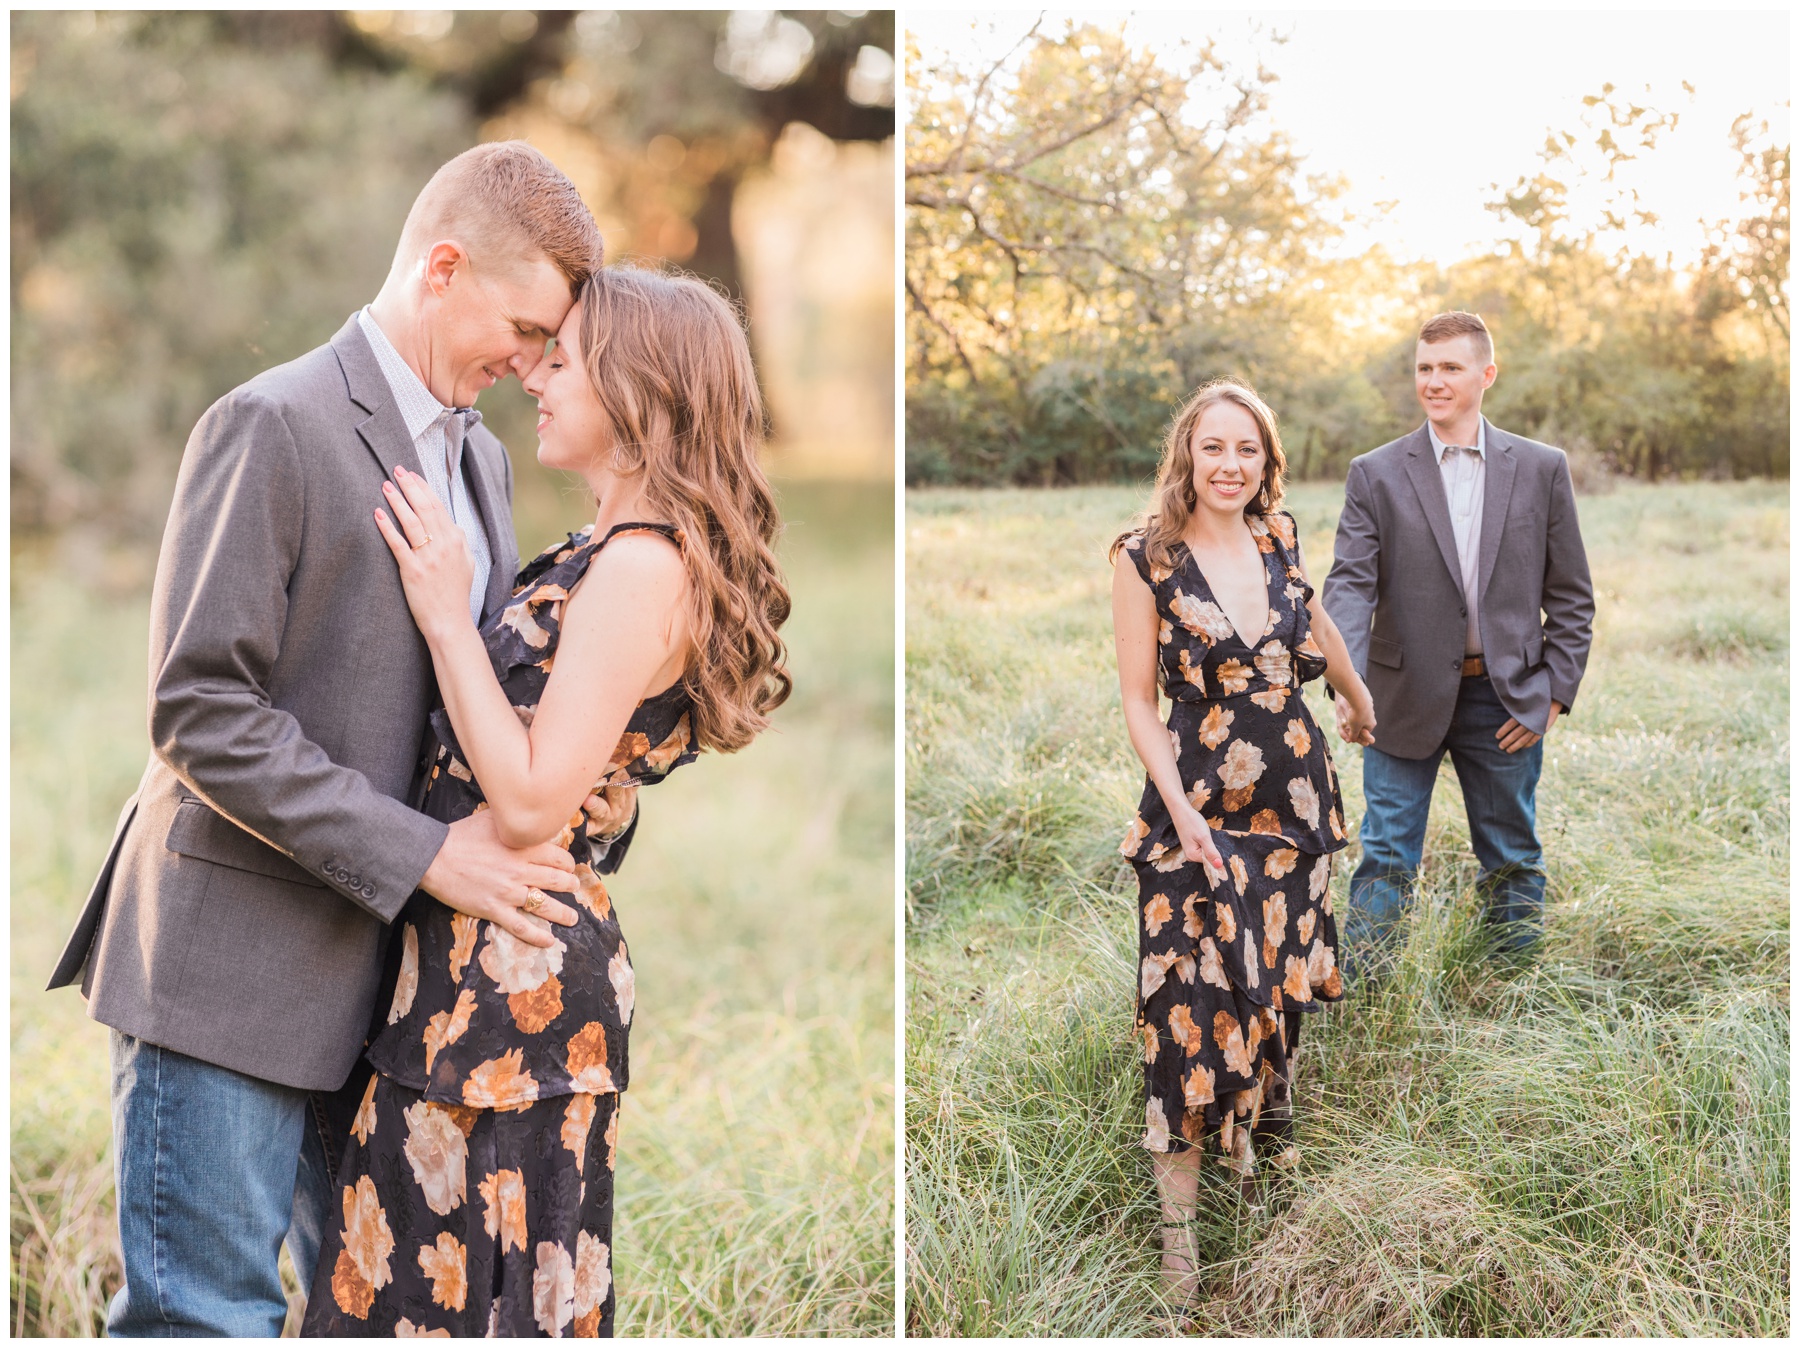 Brazos Bend State Park engagement photo locations